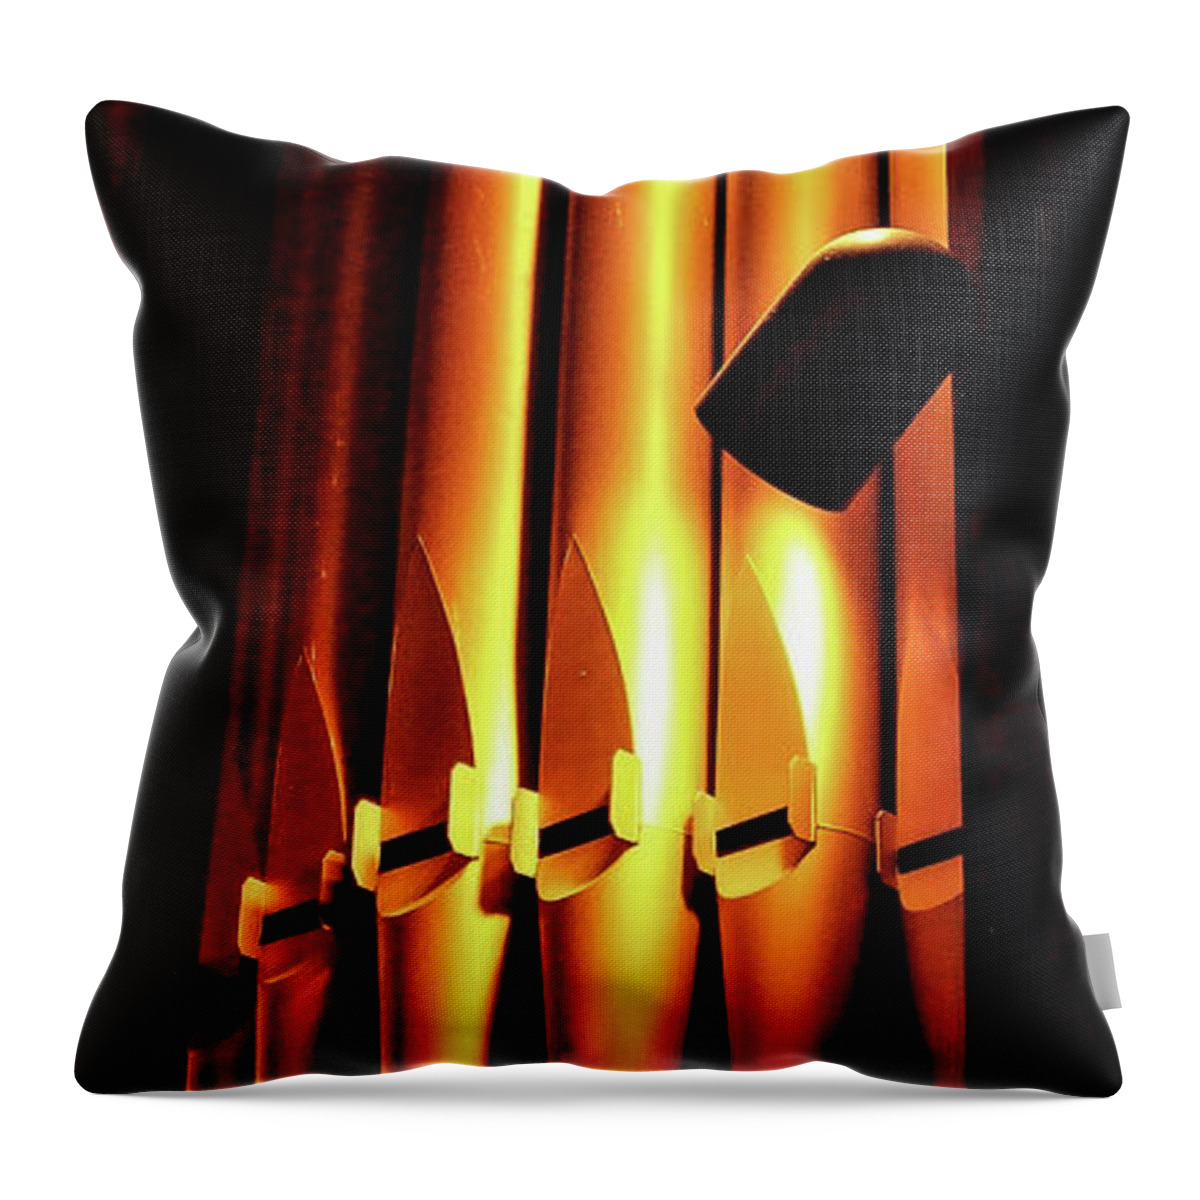 Organ Pipes Church Metal Lights Throw Pillow featuring the photograph Organ Pipes by John Linnemeyer